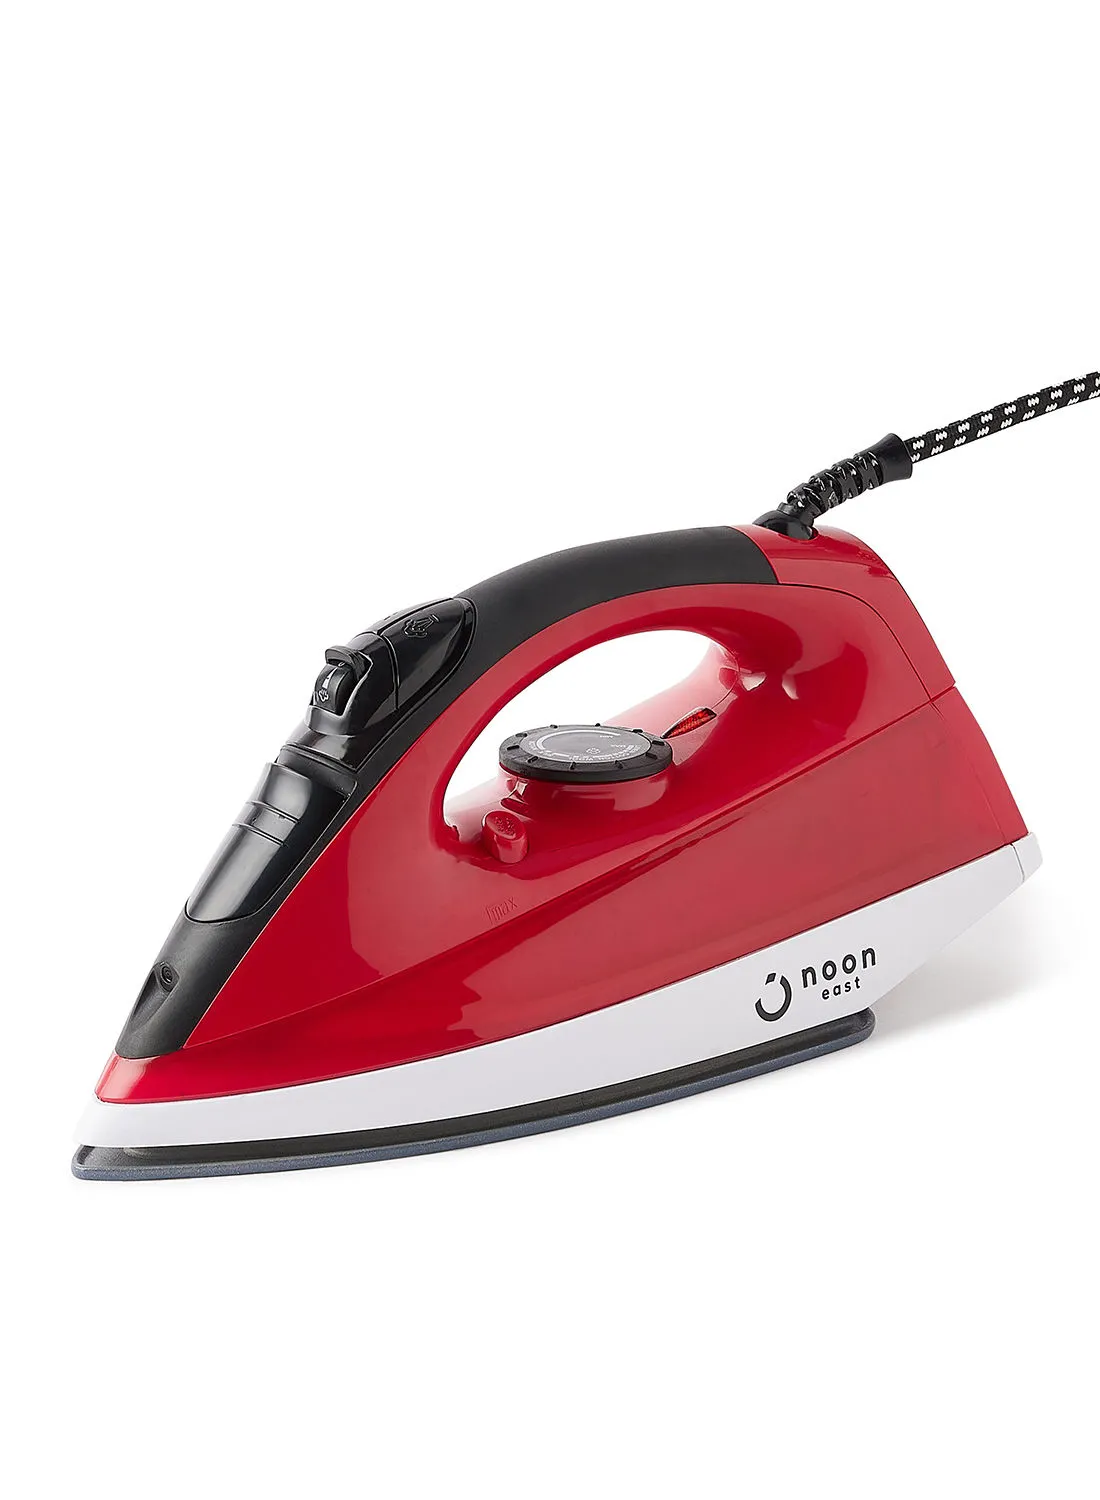 noon east Steam Iron Box - 2200 W 0.42 Liter Water Tank Non Stick Teflon Coated- Red/Black